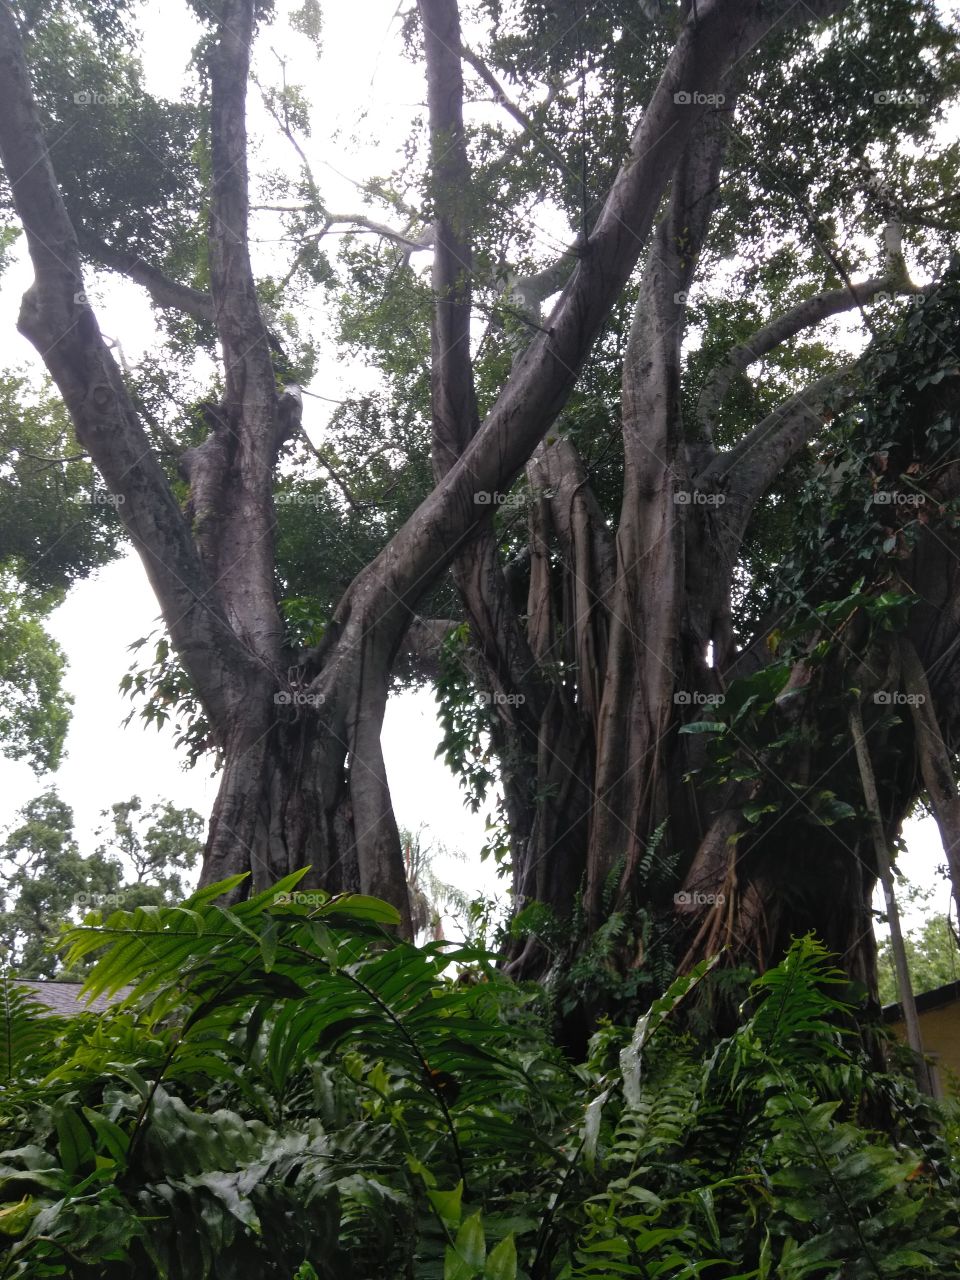 Ficus, huge banyon tree surrounded by ferns, lush moist rainforet if wonders to walk through in NW Manatee county